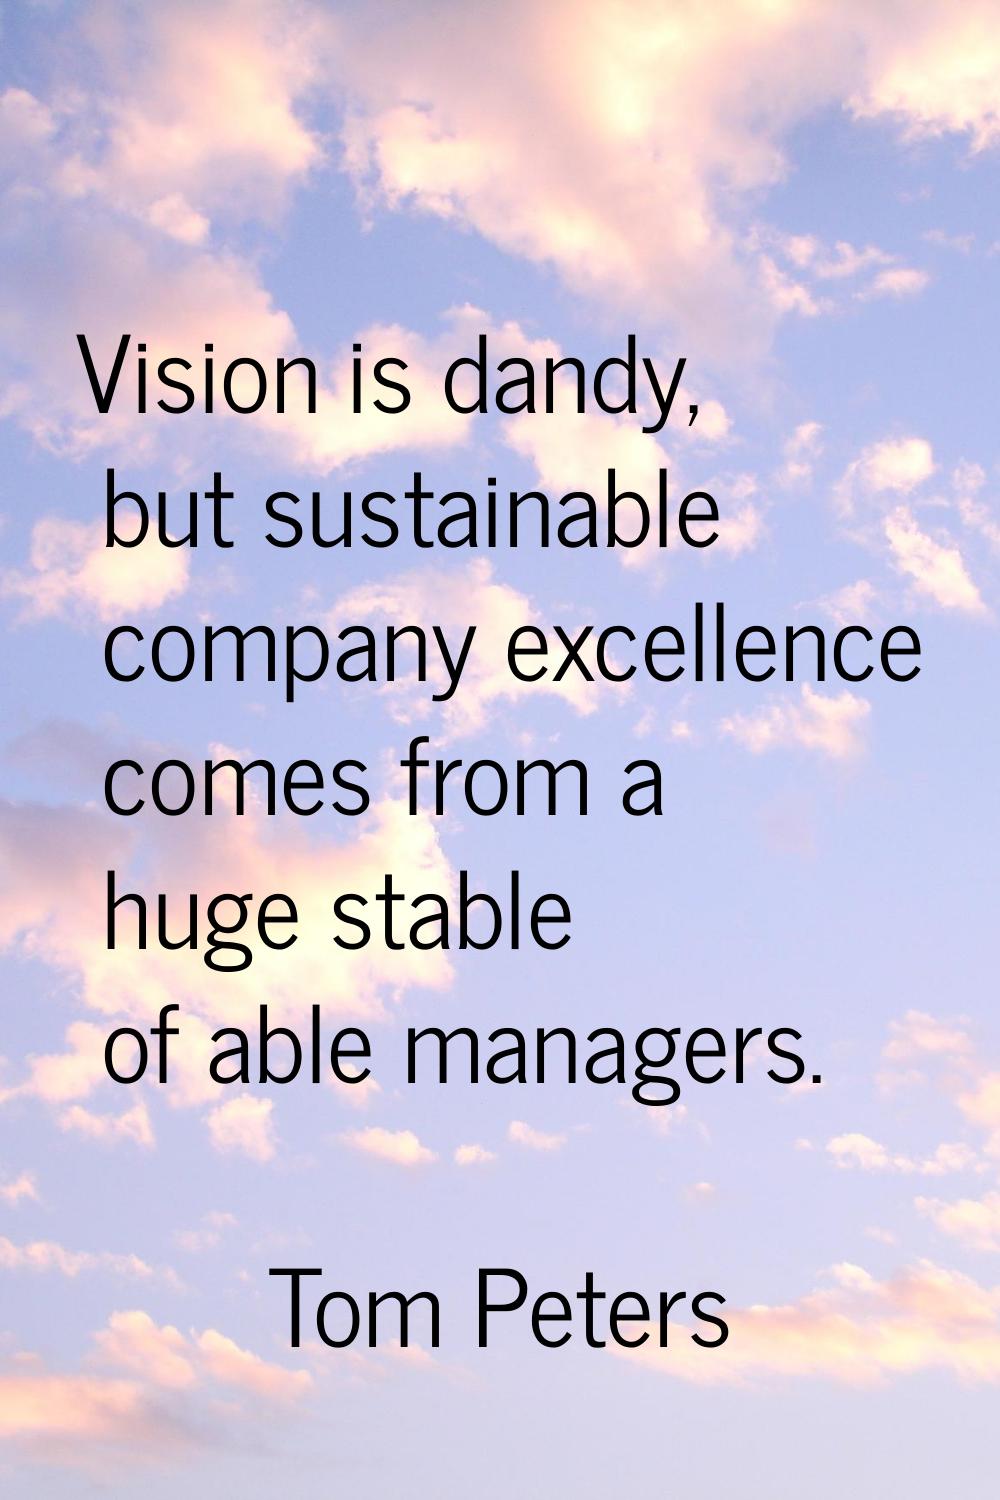 Vision is dandy, but sustainable company excellence comes from a huge stable of able managers.